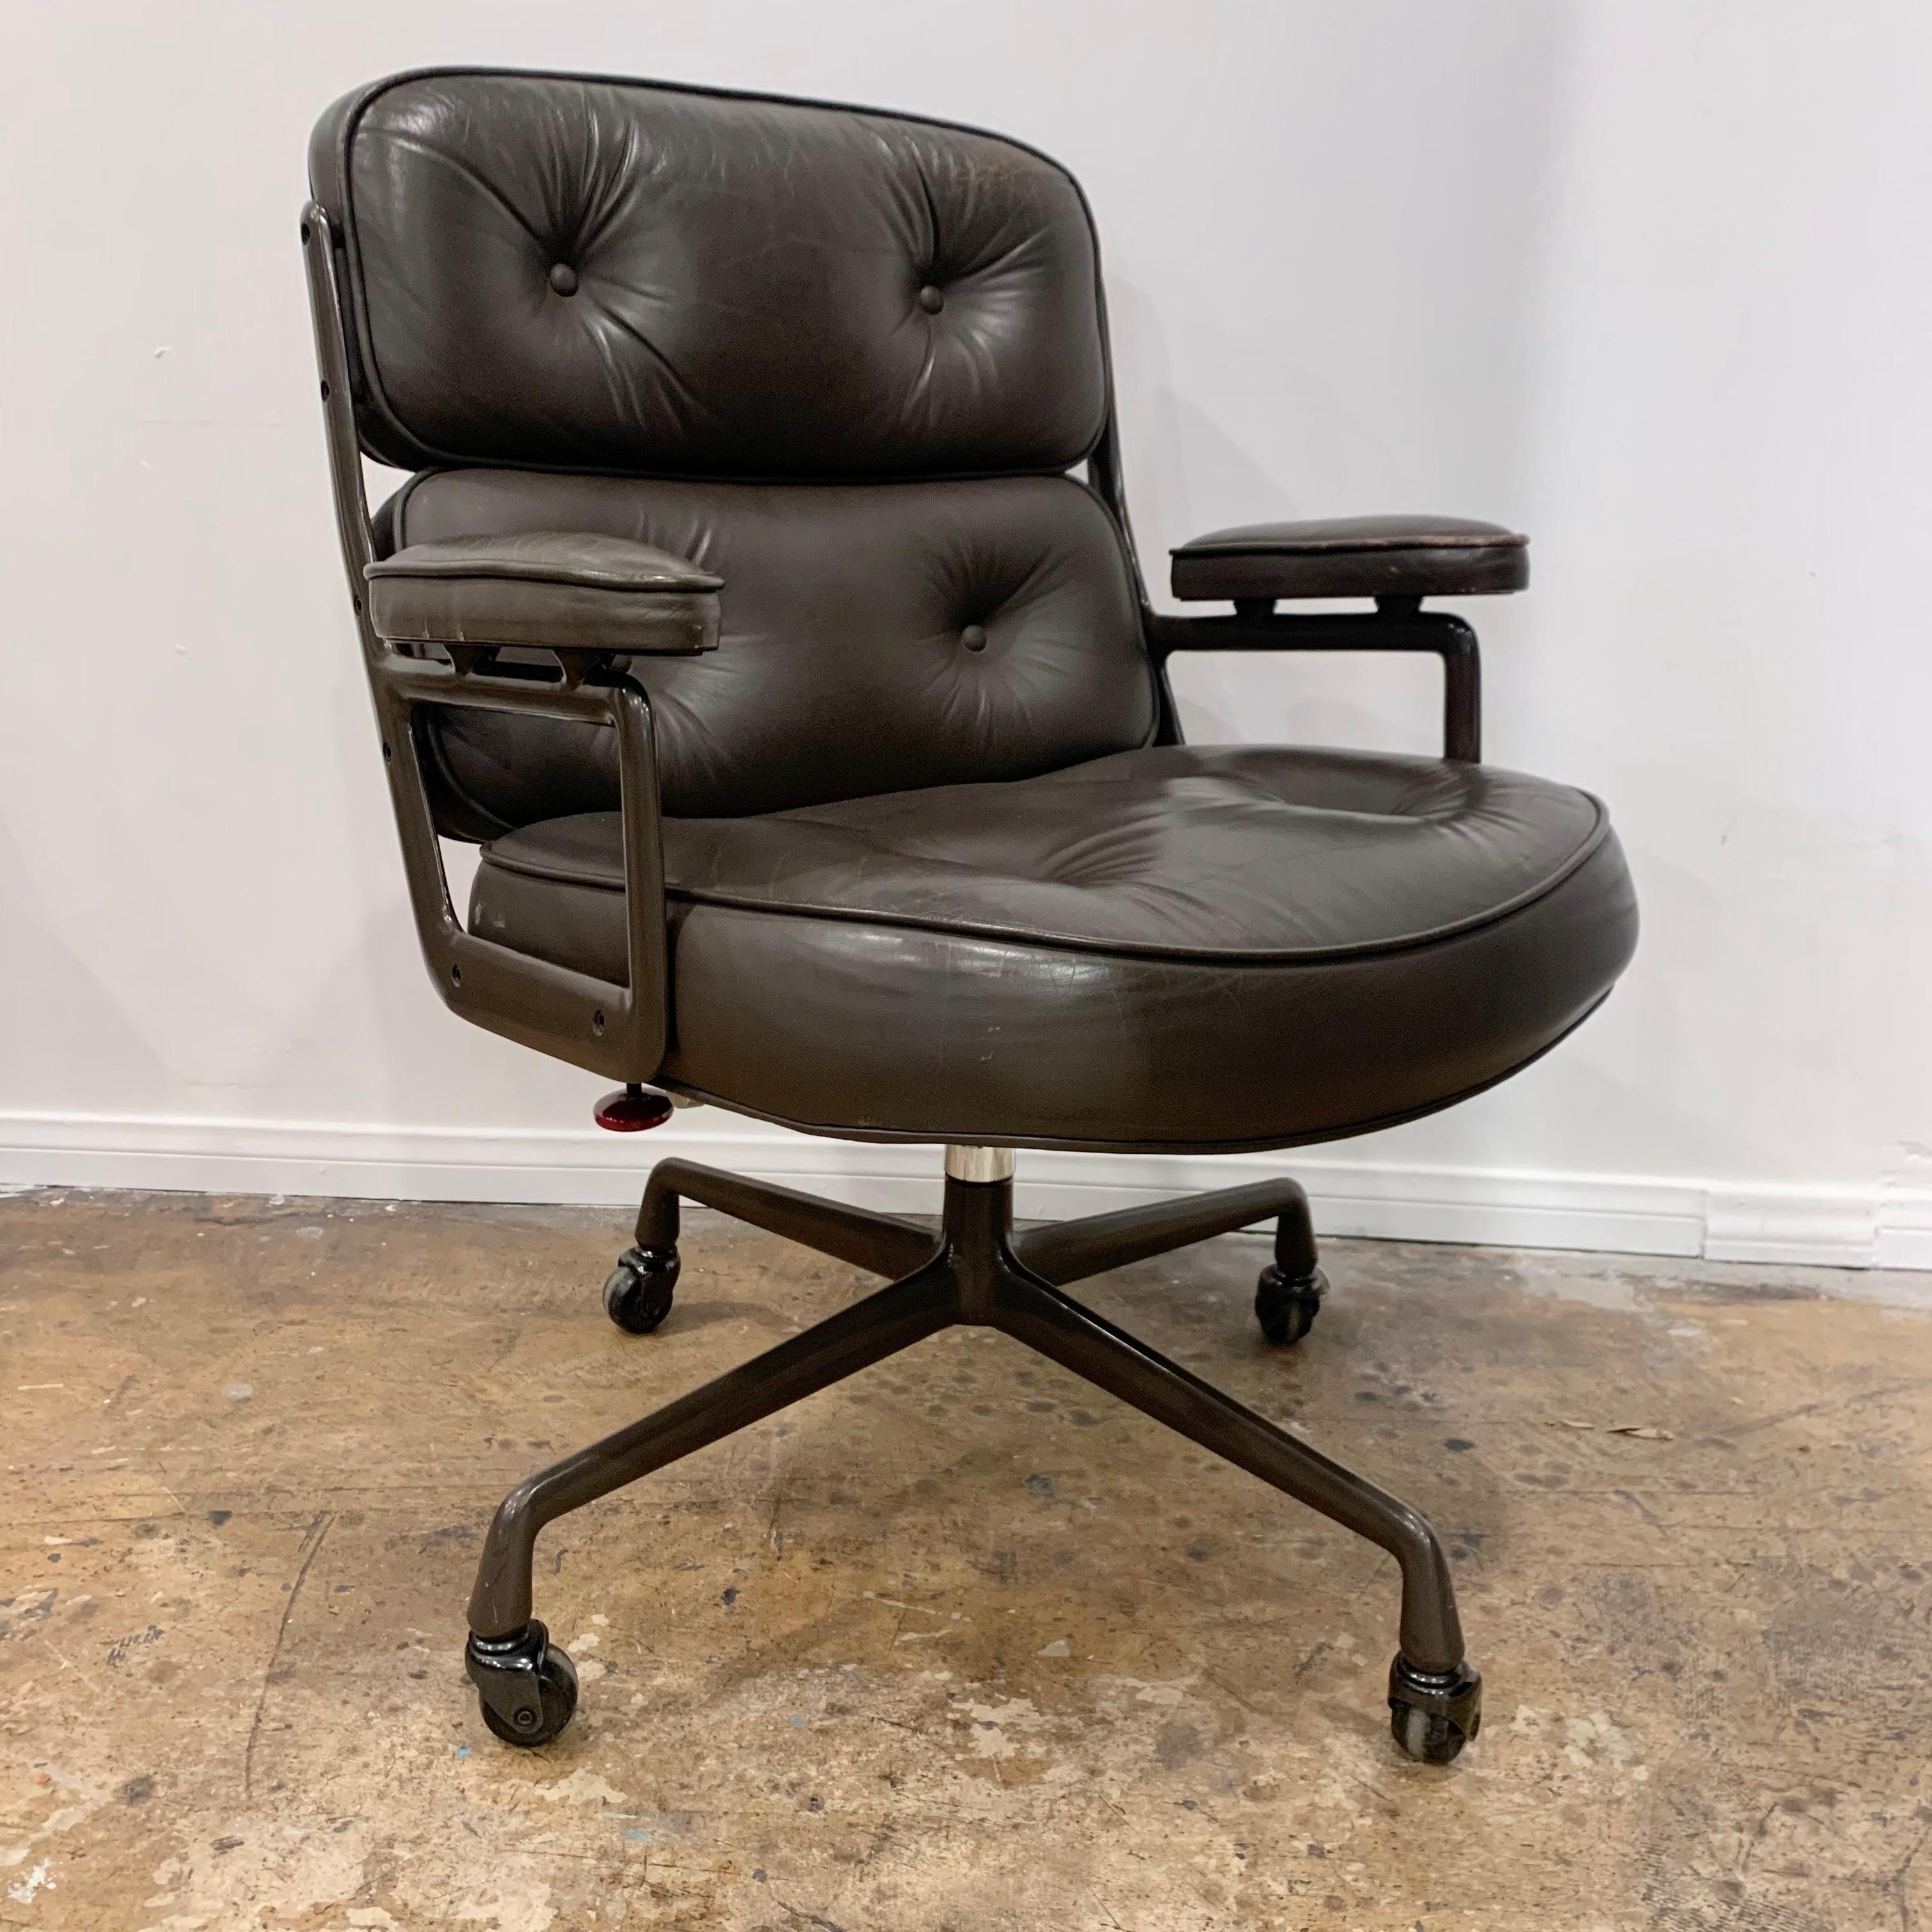 Late 20th Century Original Eames Time Life Chair in Olive Brown Leather